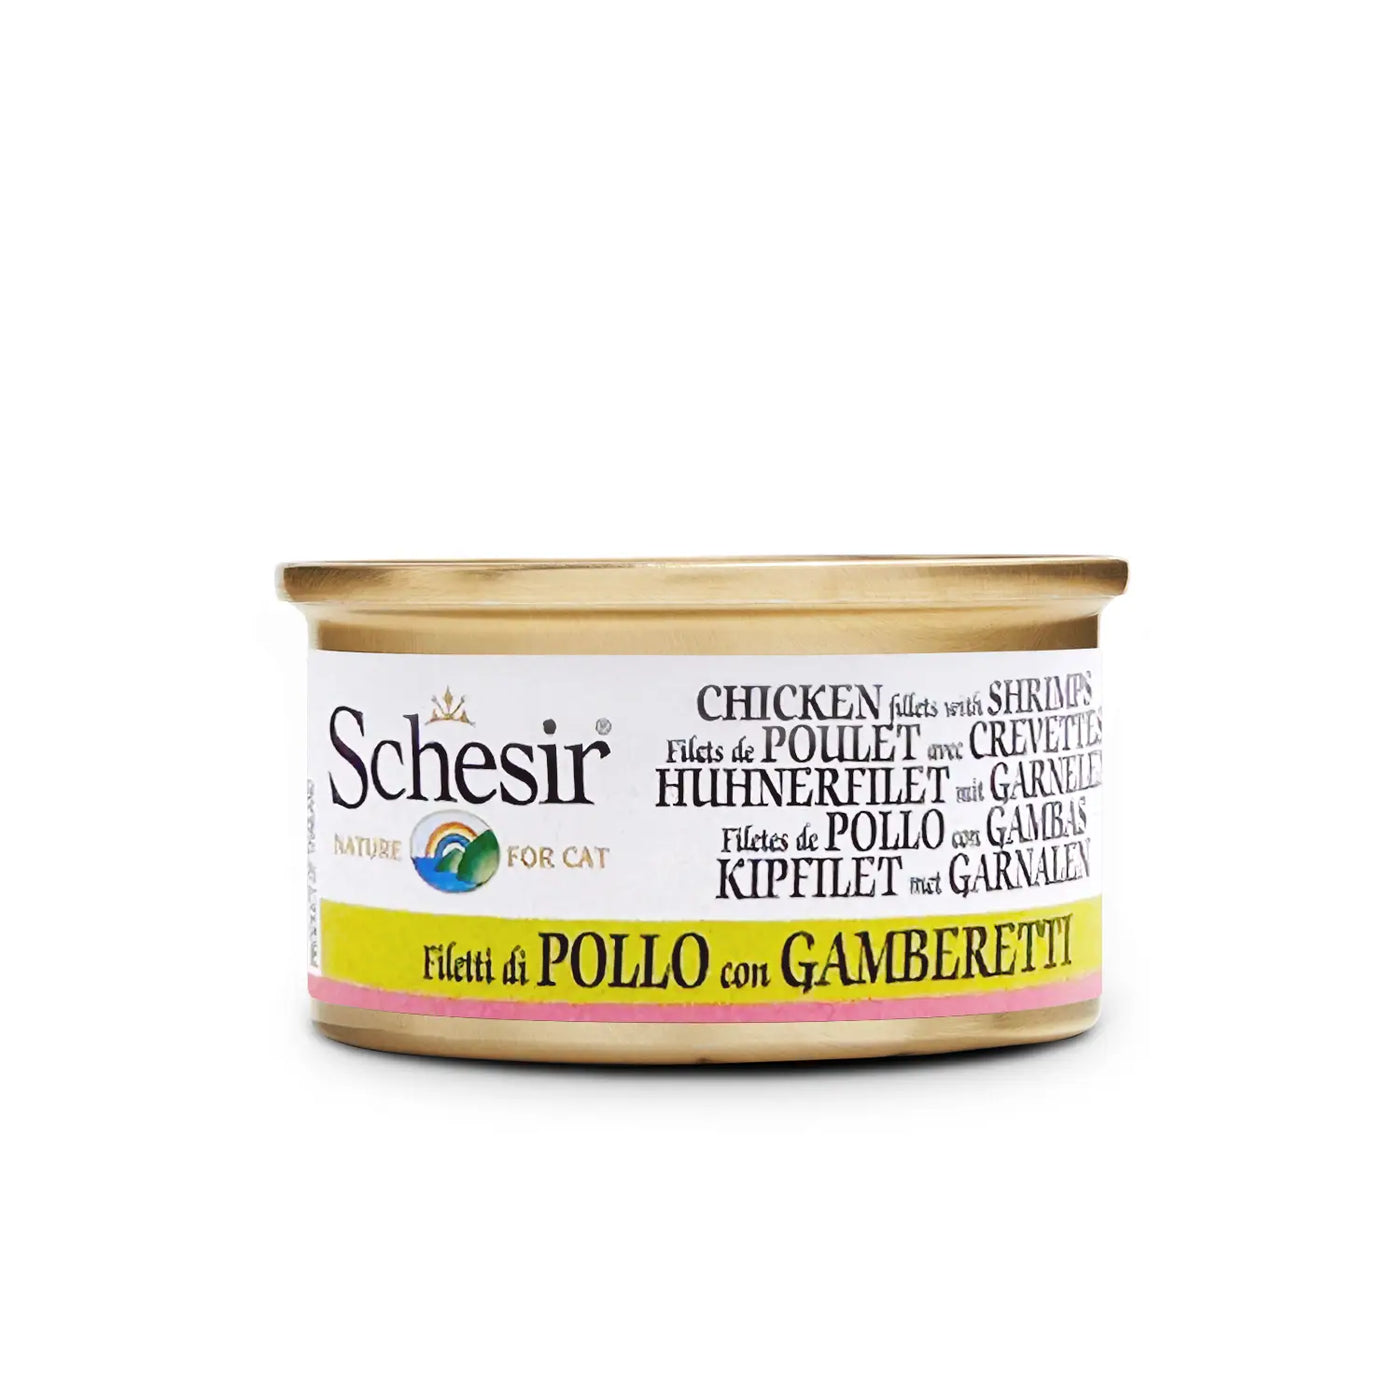 Schesir - Complementary Wet Food For Adult Cats - Chicken Fillets With Shrimps In Cooking Broth 70g